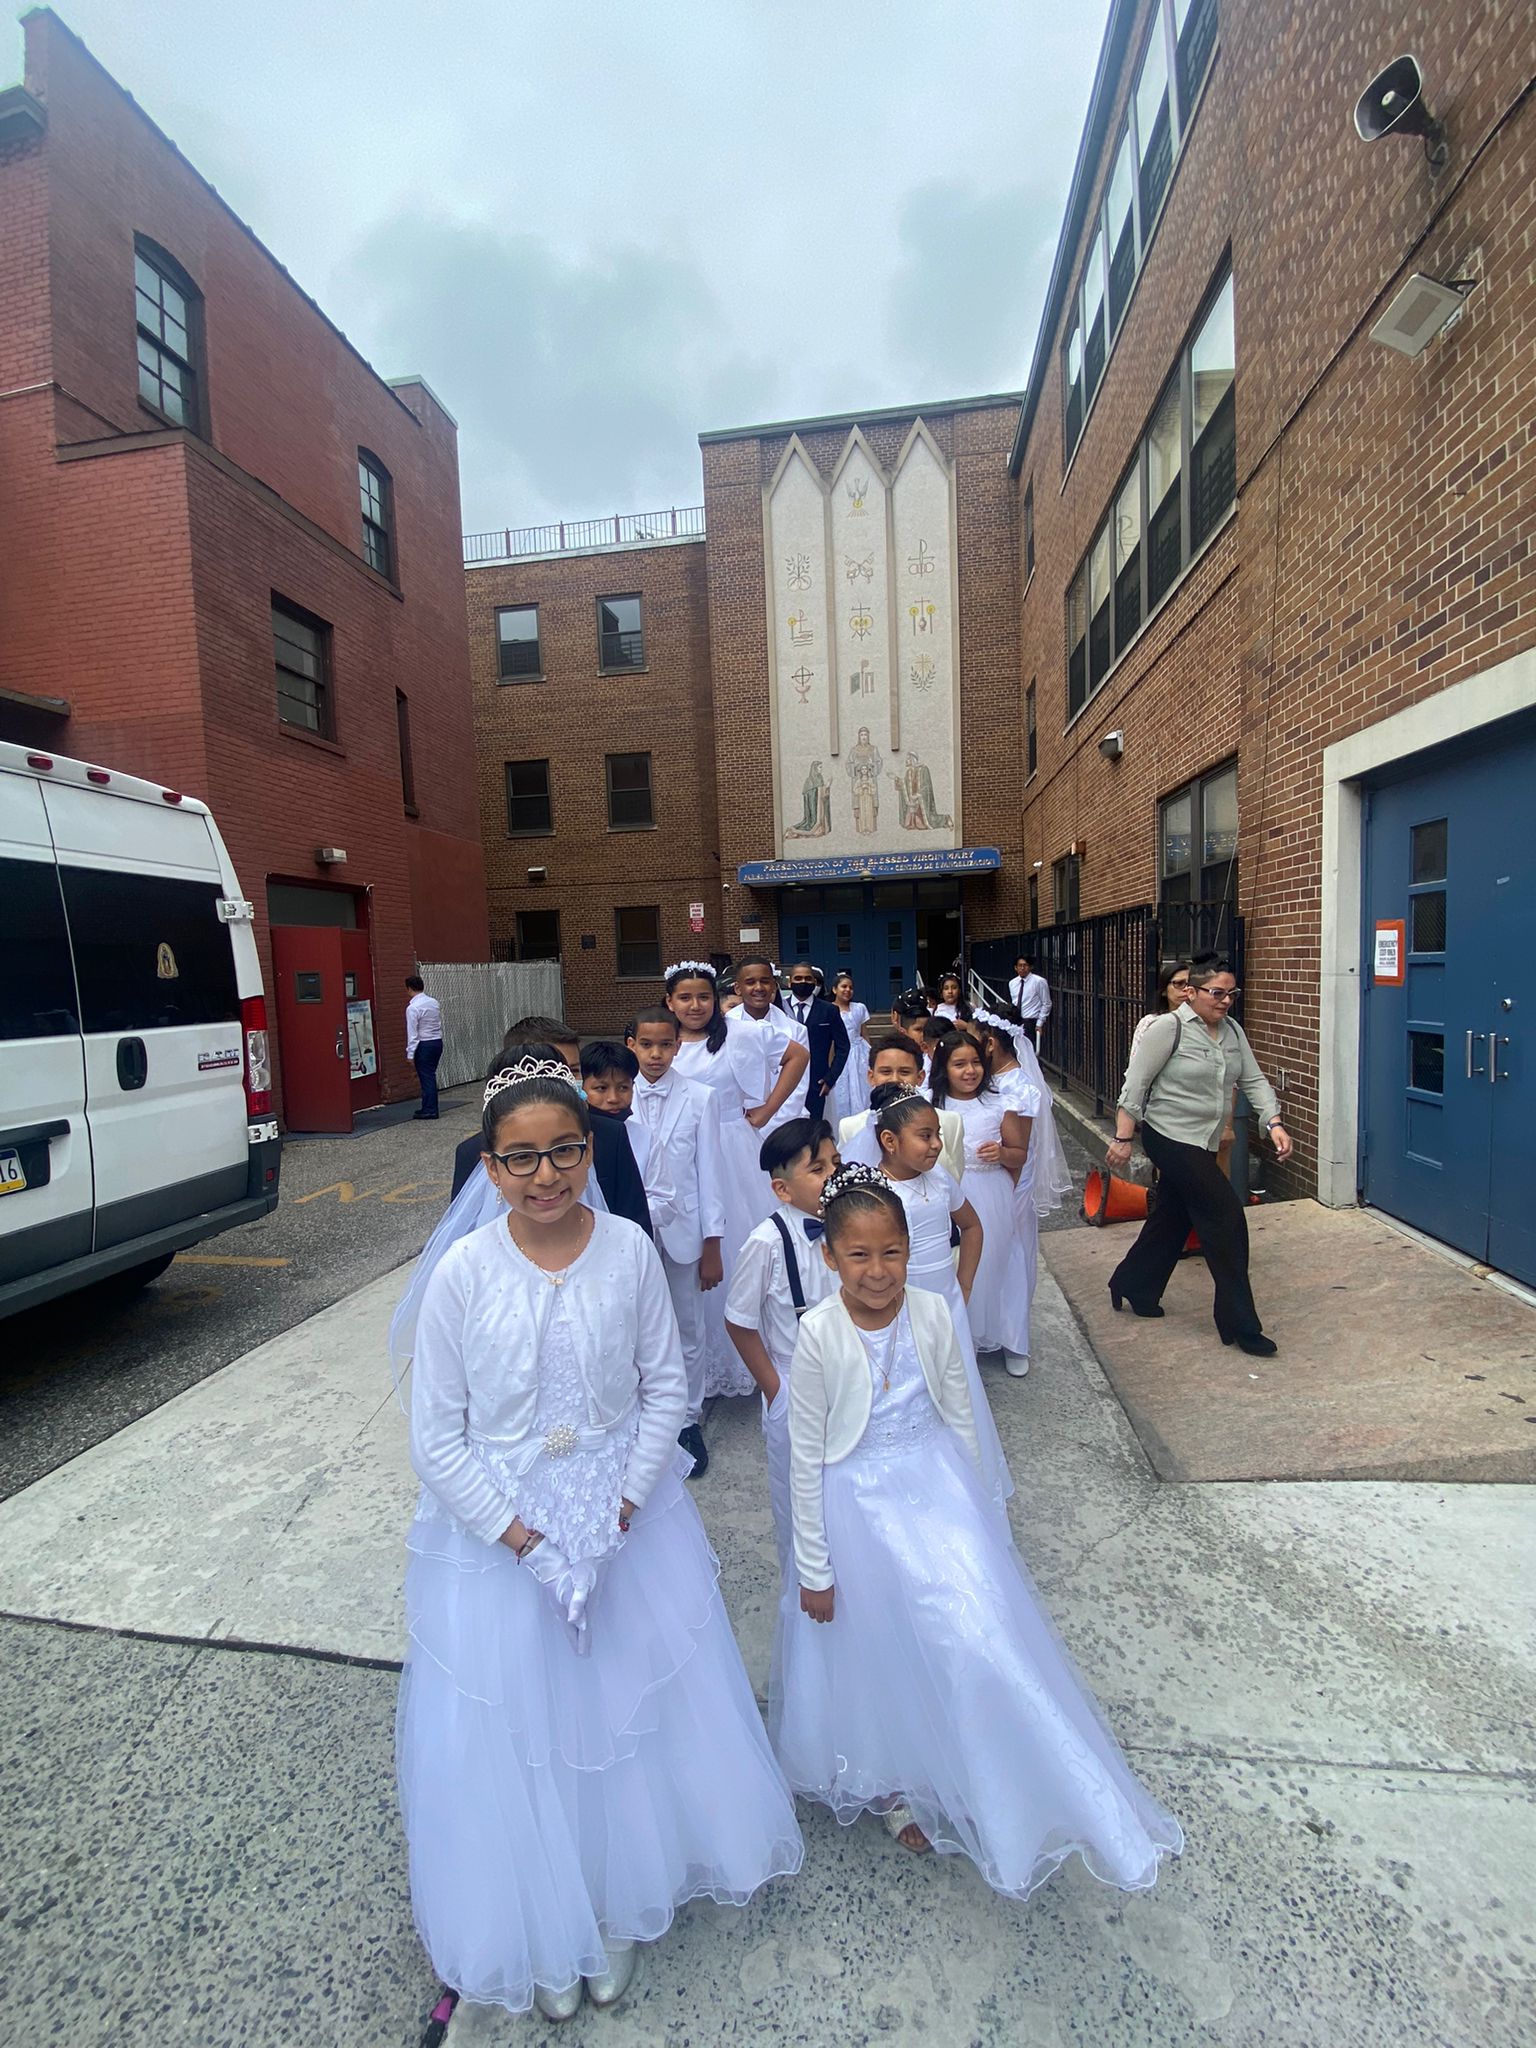 A group of young people in white dresses walking down the street.